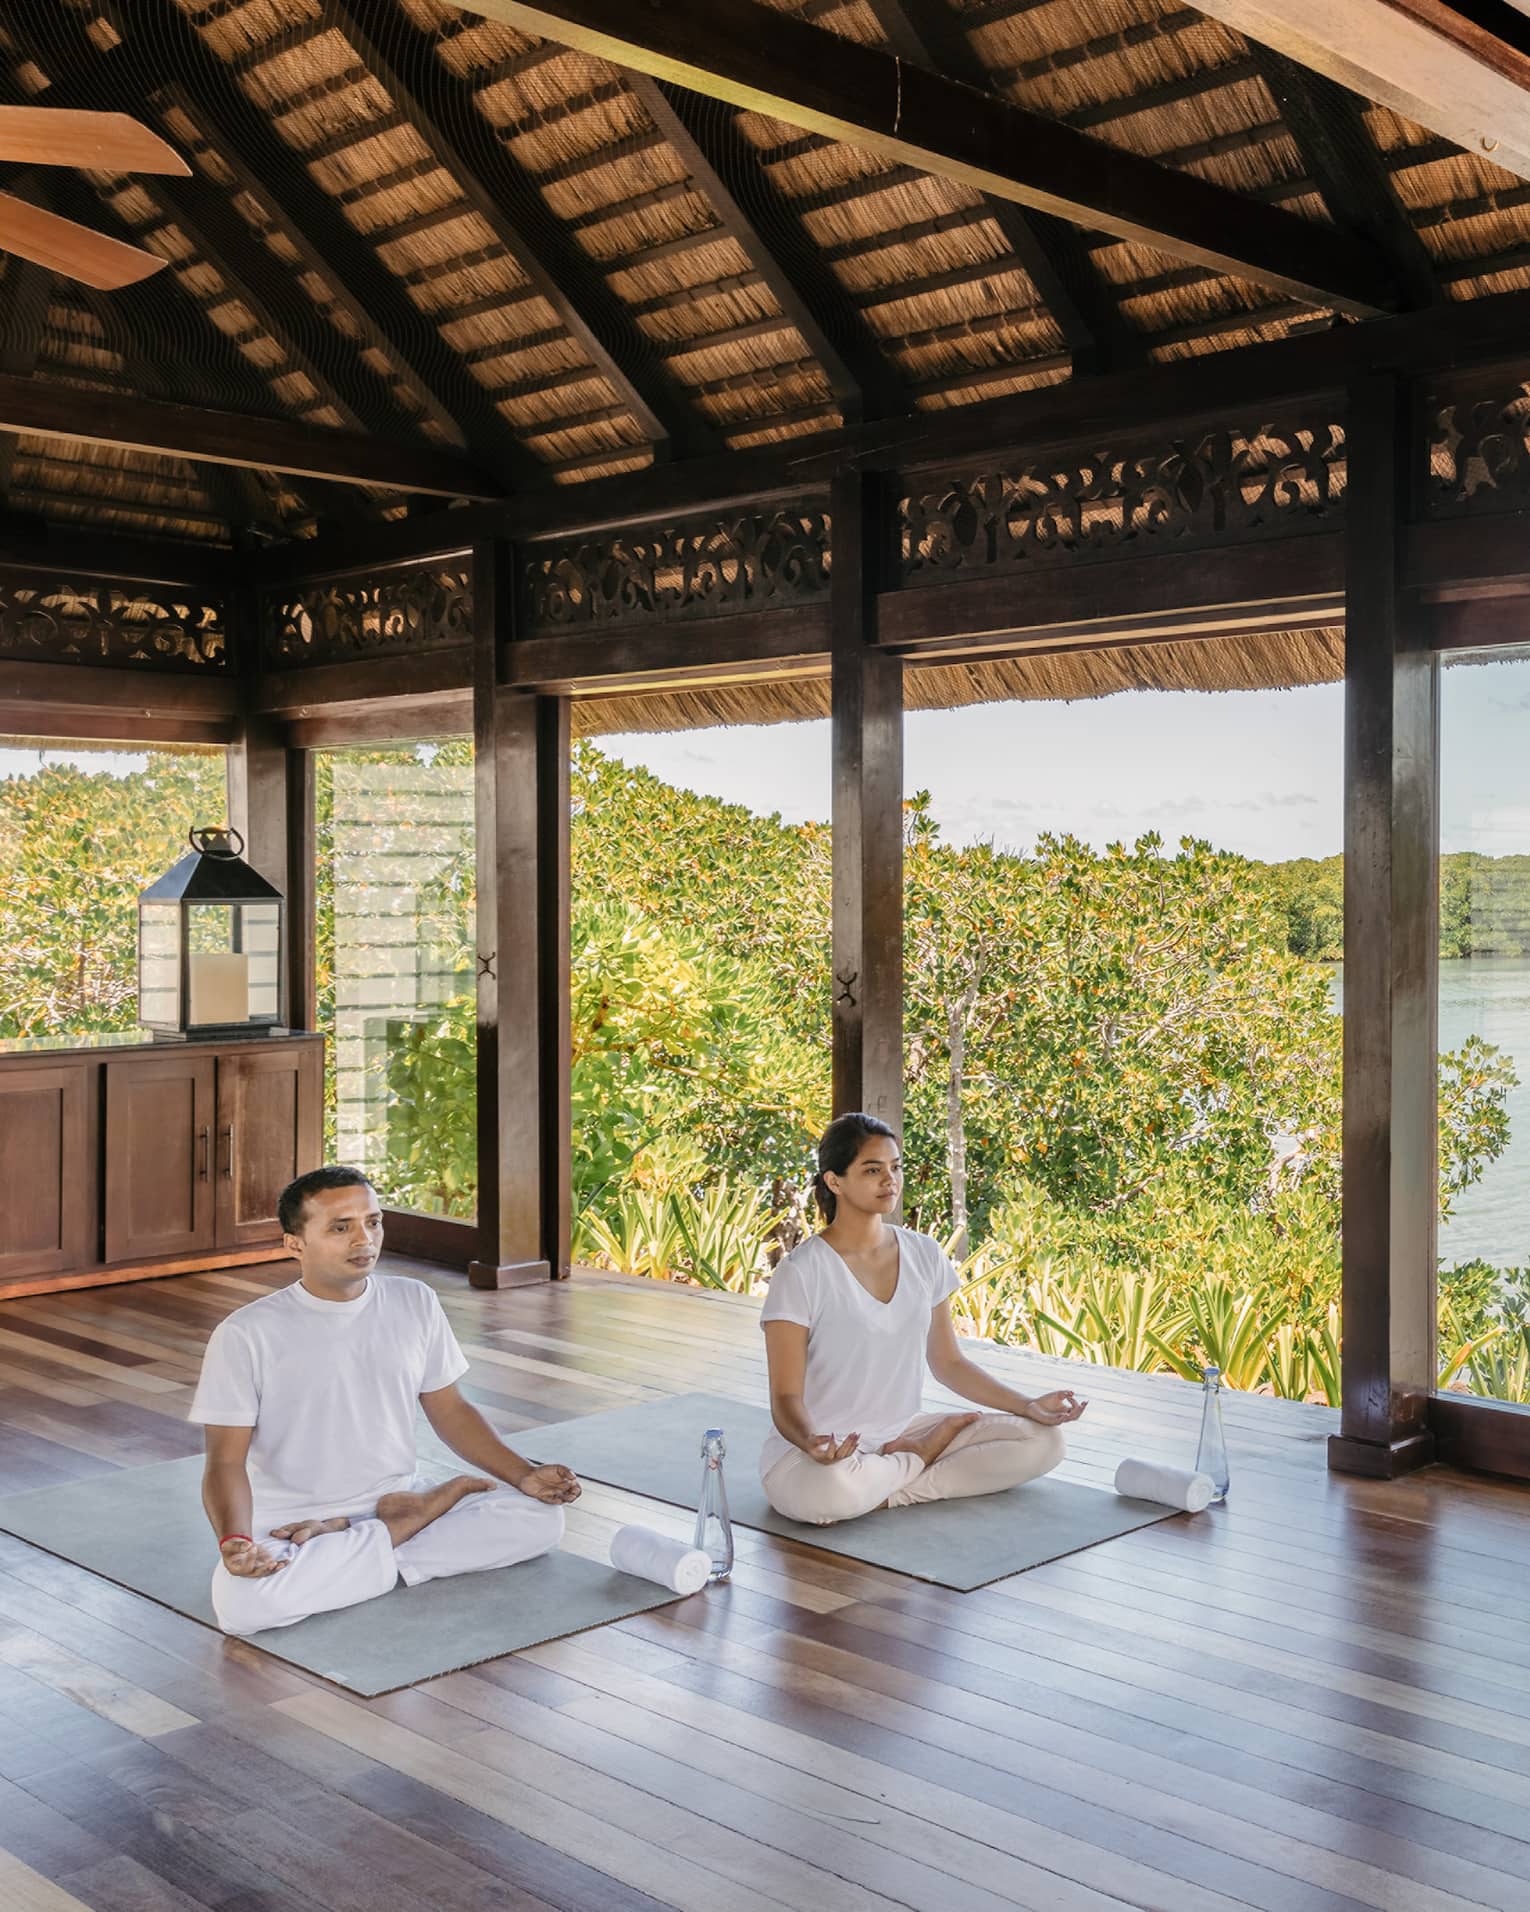 Two people wearing white seated in yoga poses in open-air spa yoga pavilion by beach